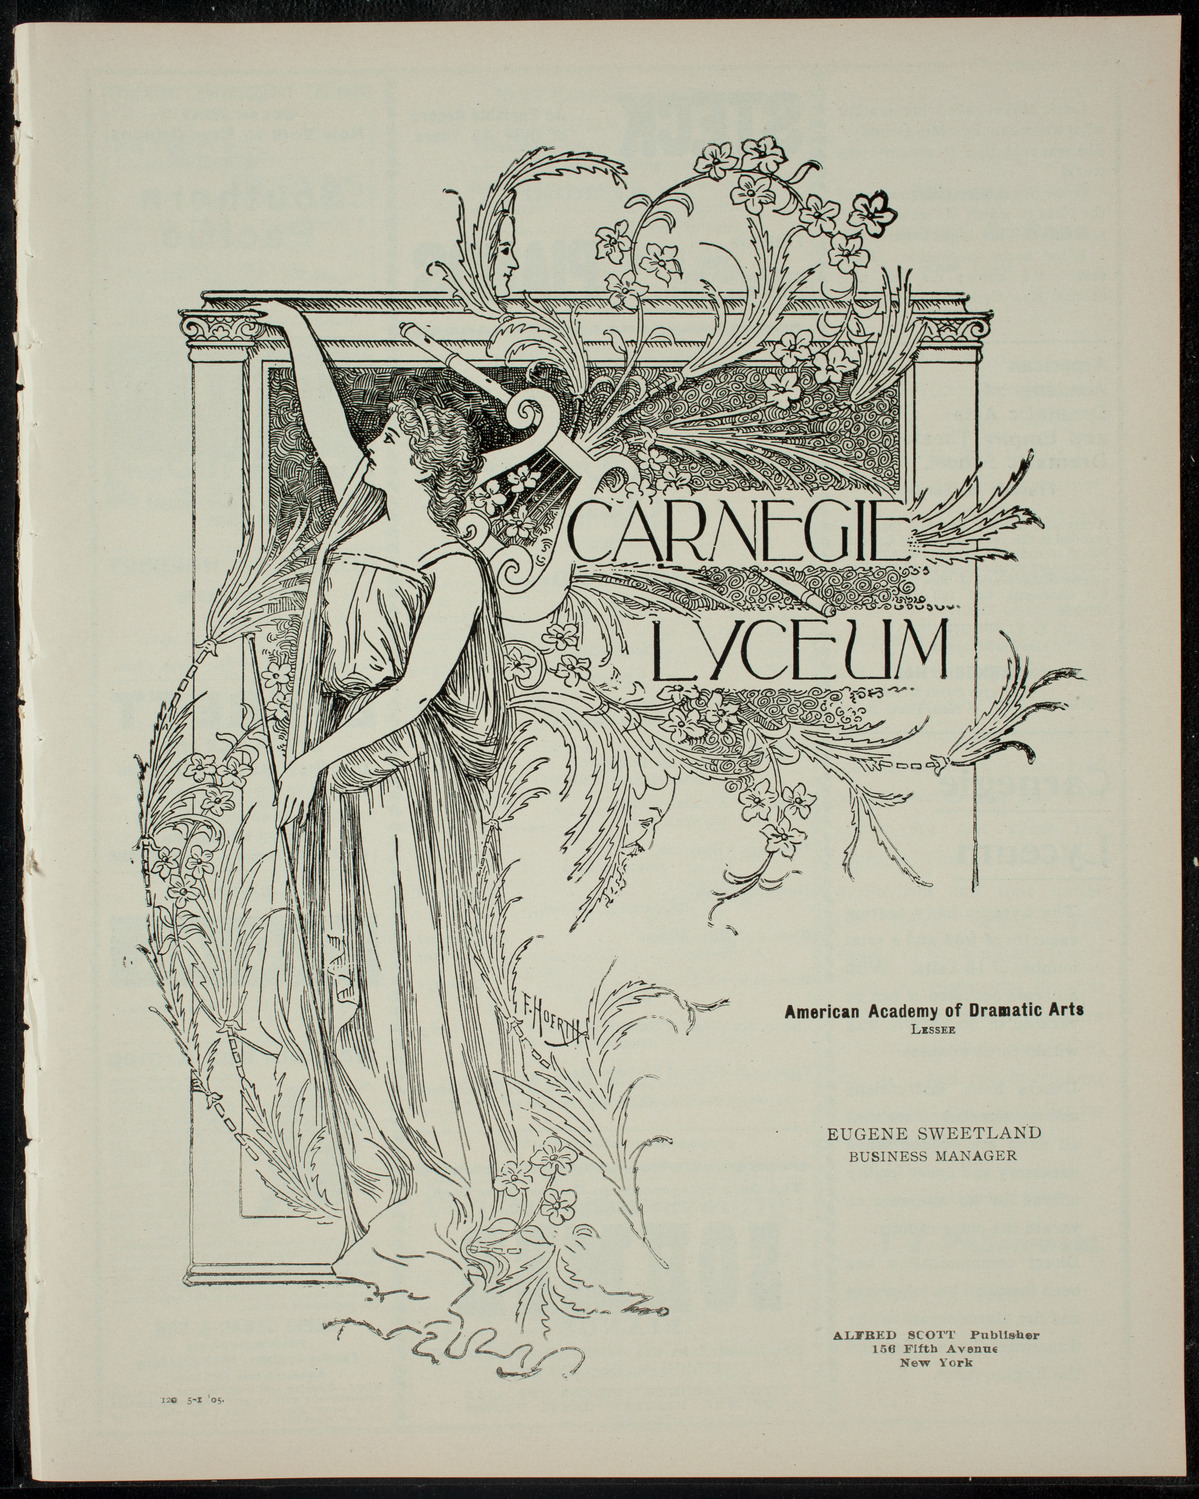 Fordham University Musical and Drama Clubs, May 1, 1905, program page 1